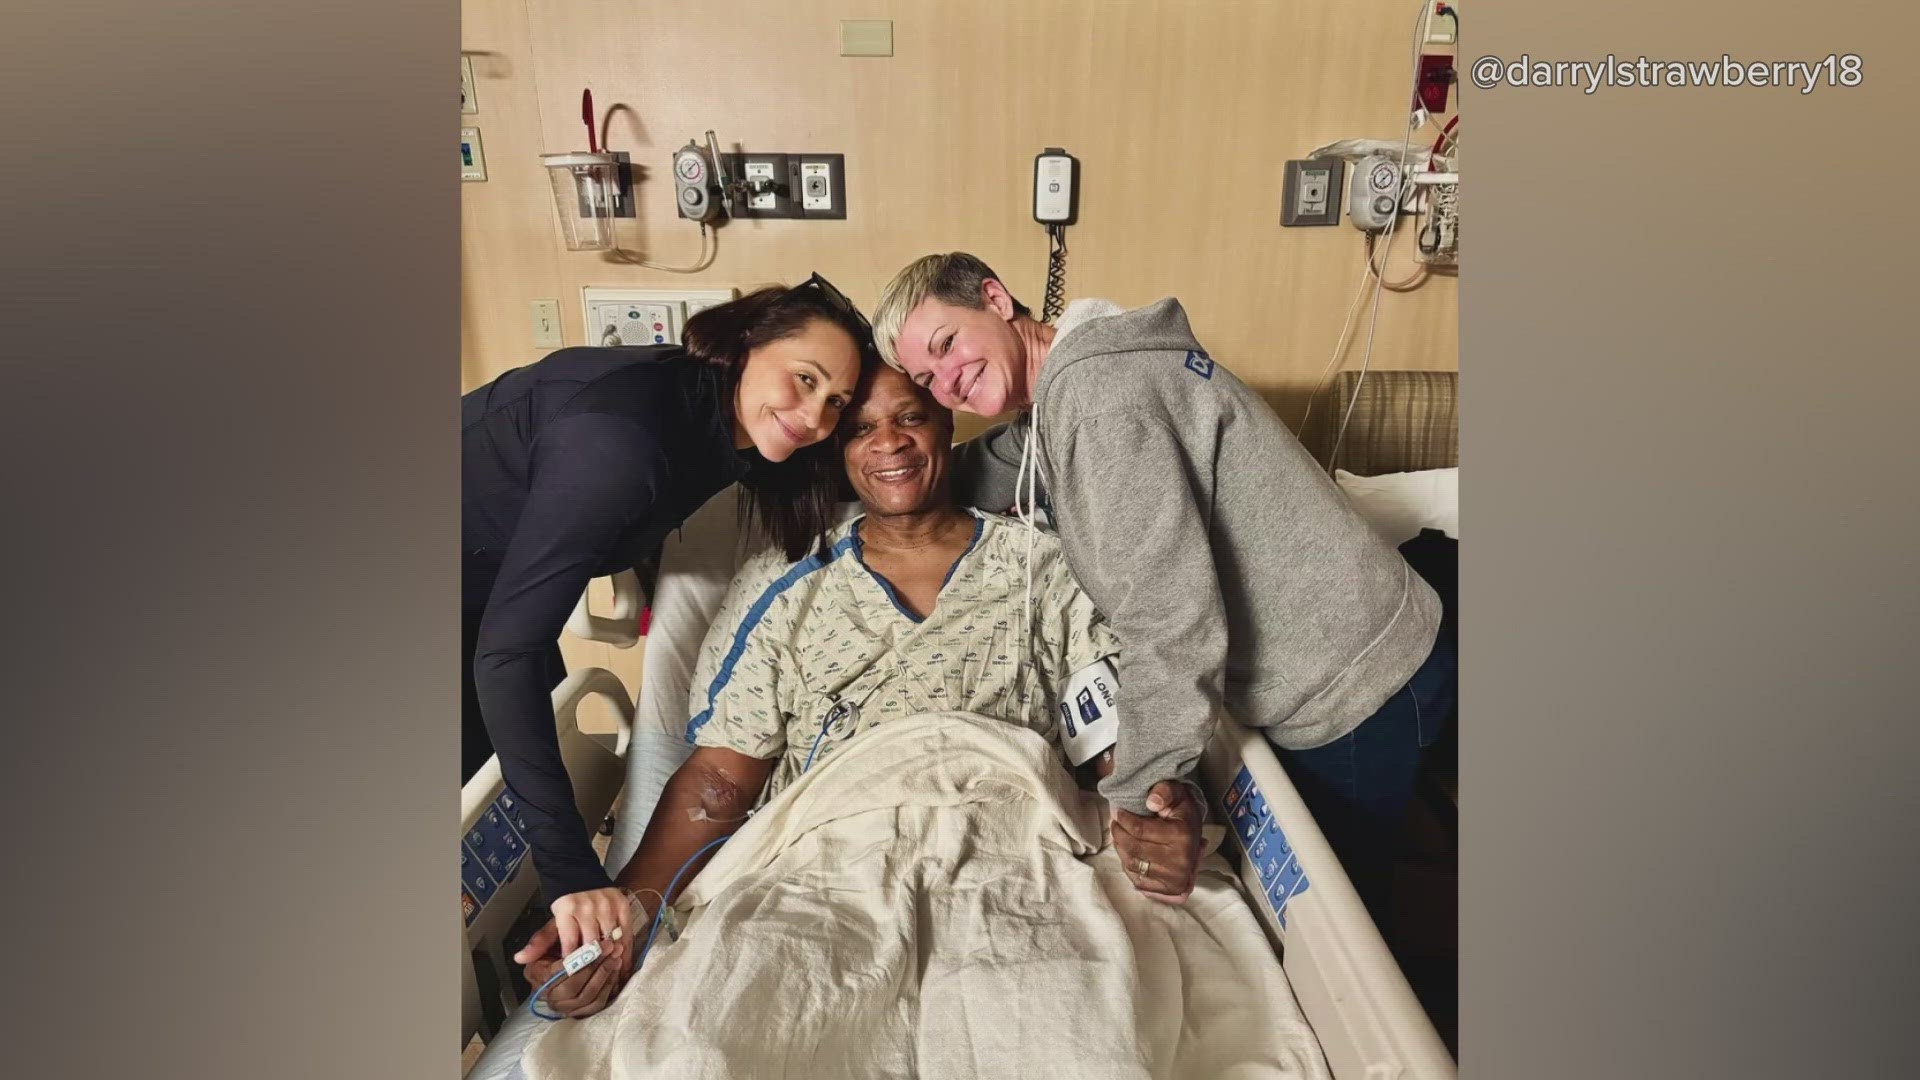 Former New York Mets and Yankees star Darryl Strawberry is recovering from a heart attack. The former New York Mets and Yankees star lives in O'Fallon, Missouri.